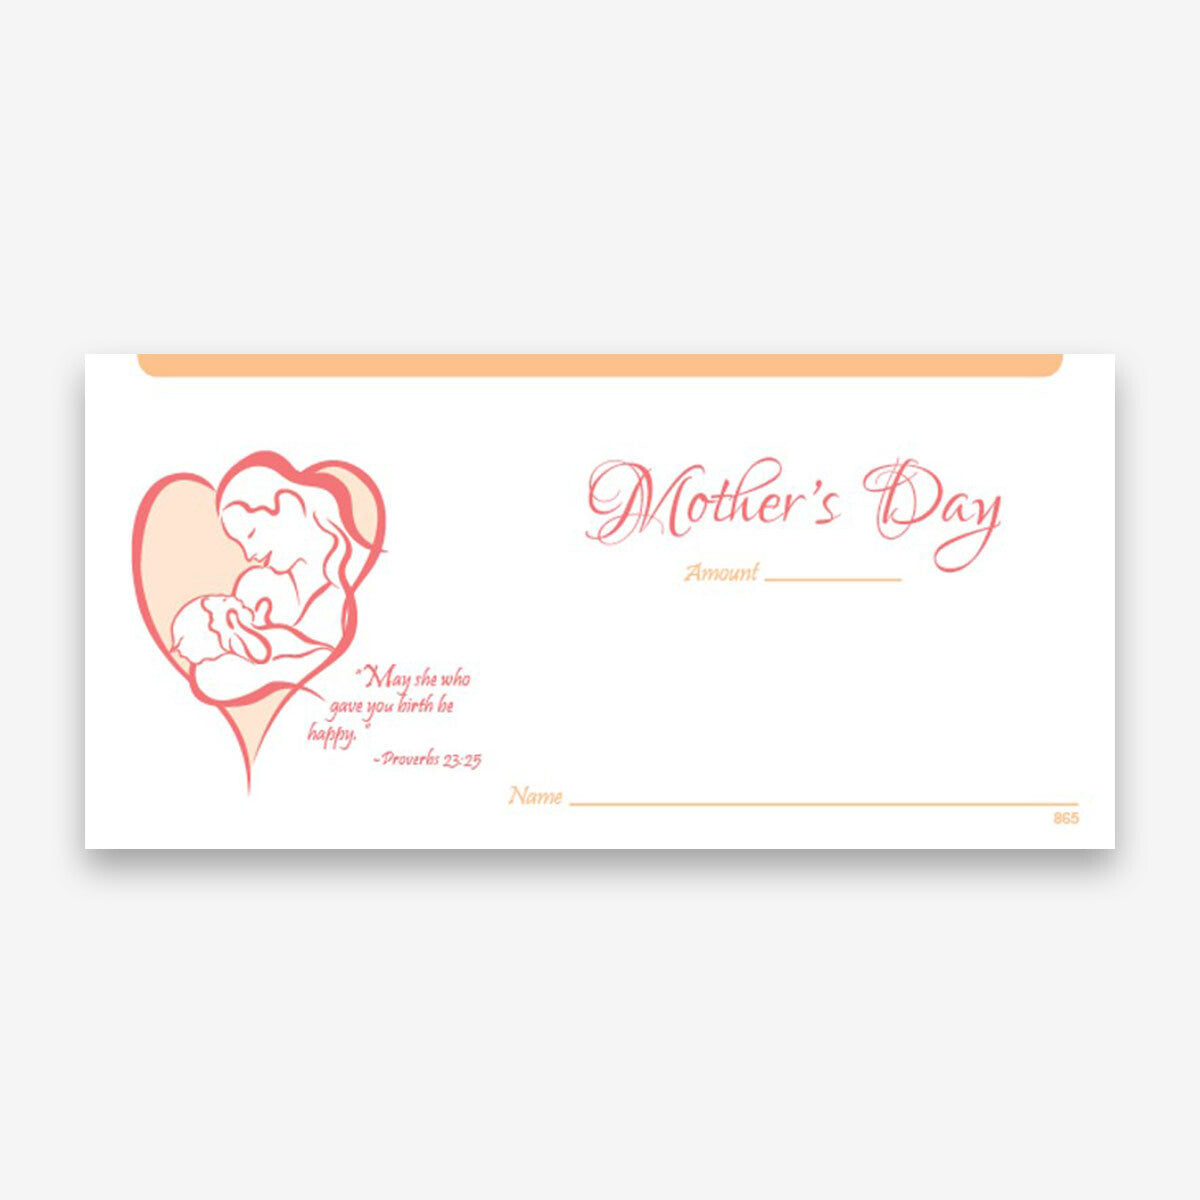 NCS National Church Solutions Mothers Day Offering Envelope